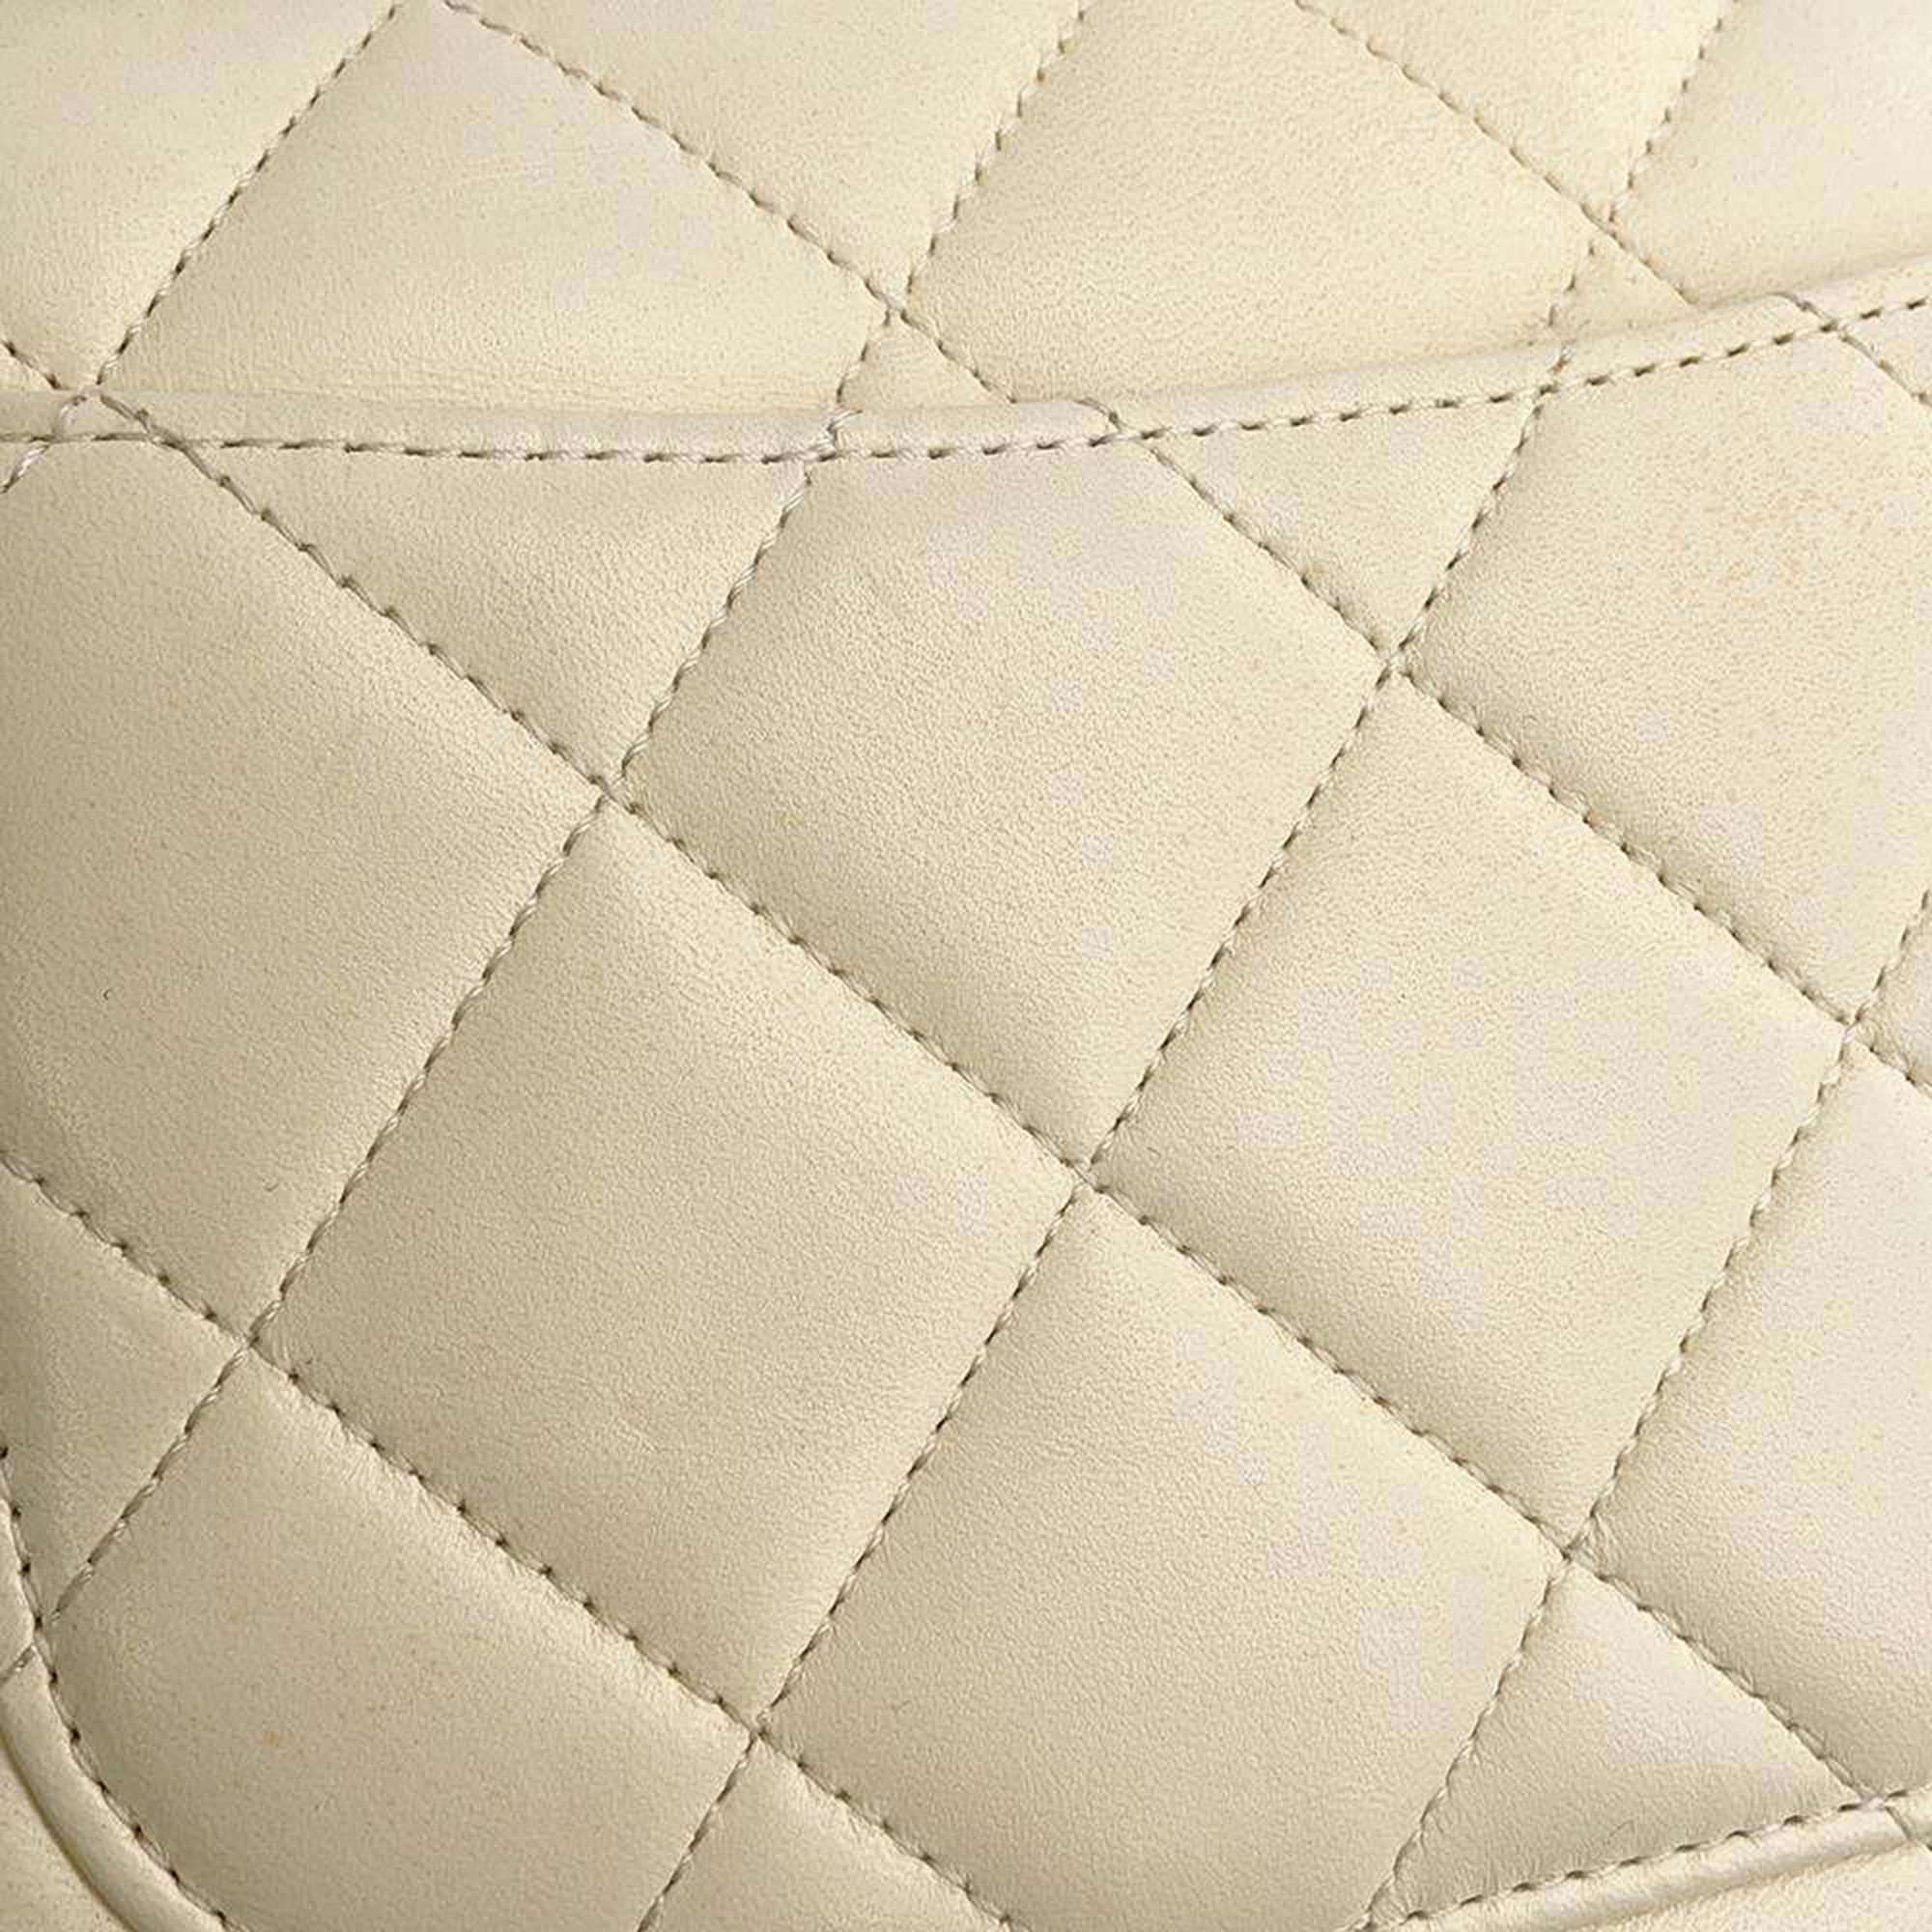 Chanel White Leather Small Trendy CC Shoulder Bag